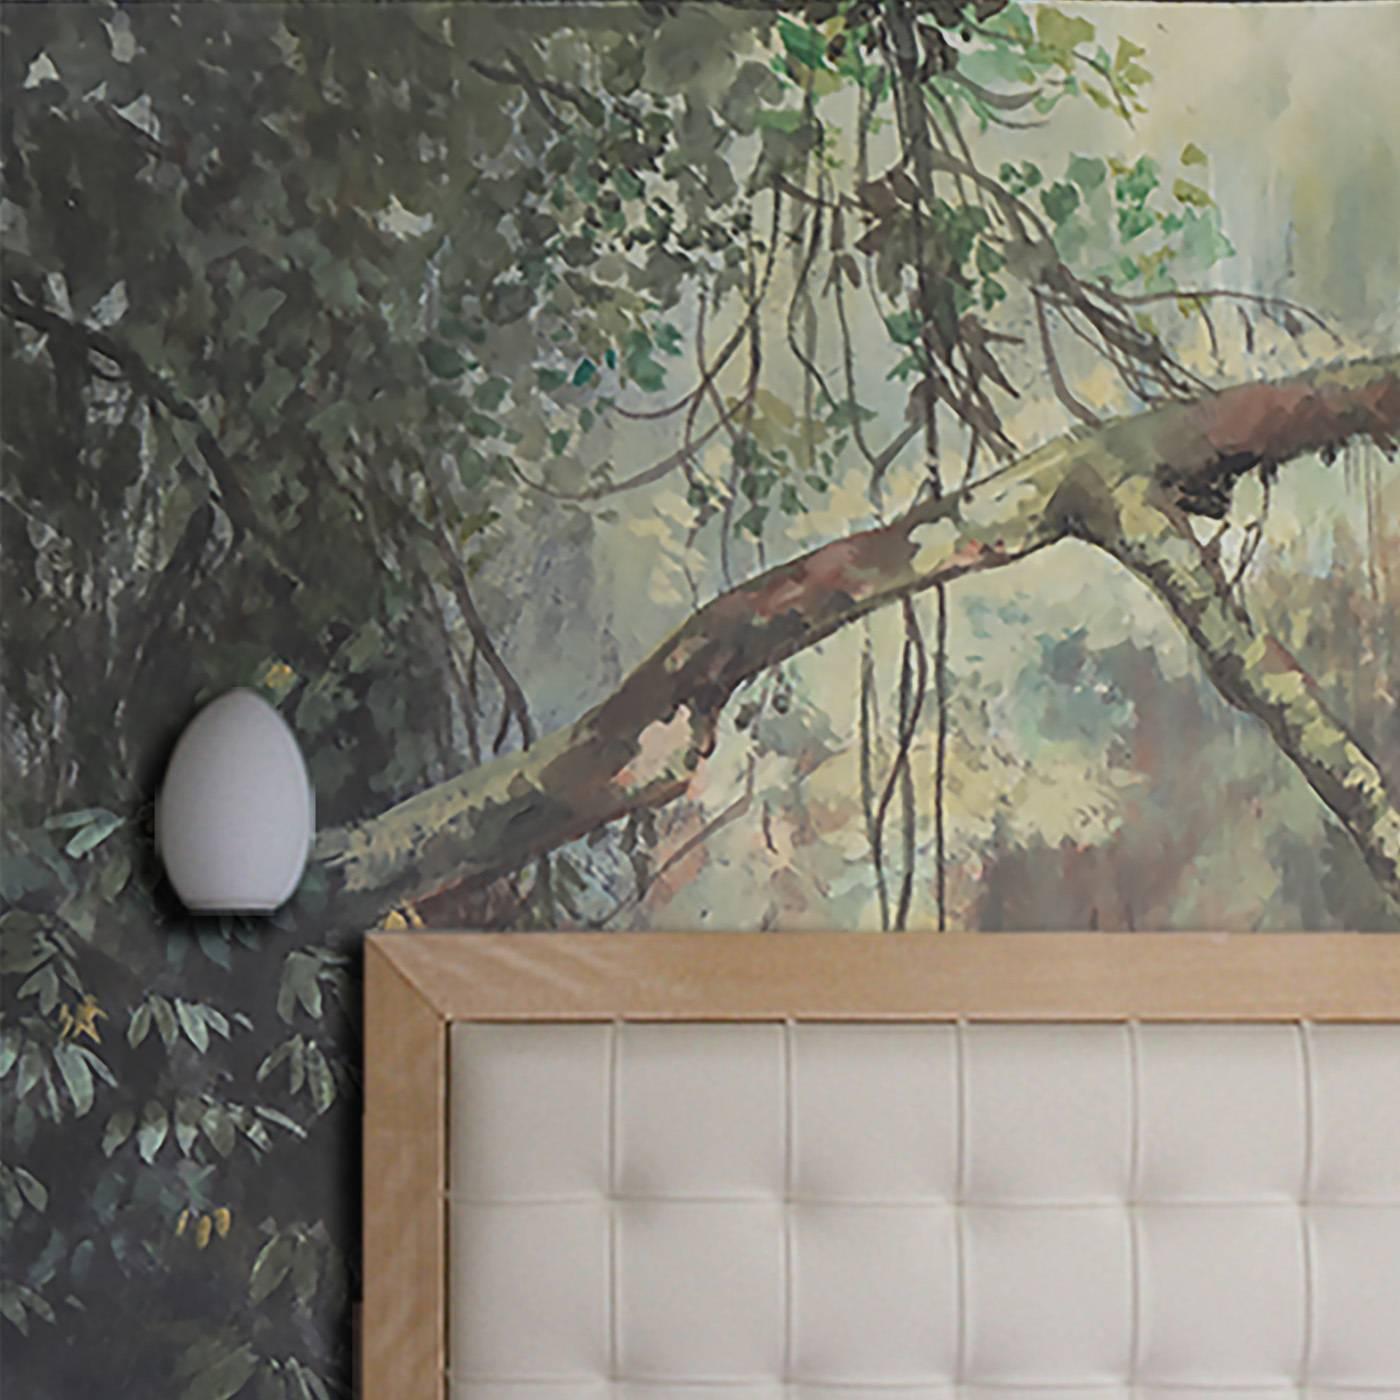 This superb wallpaper was painted freehand on paper by a skilled artisan who depicted a luxurious woods through which the light filters from above, adding an ethereal effect. The tones can be customized and a protective transparent finish can be